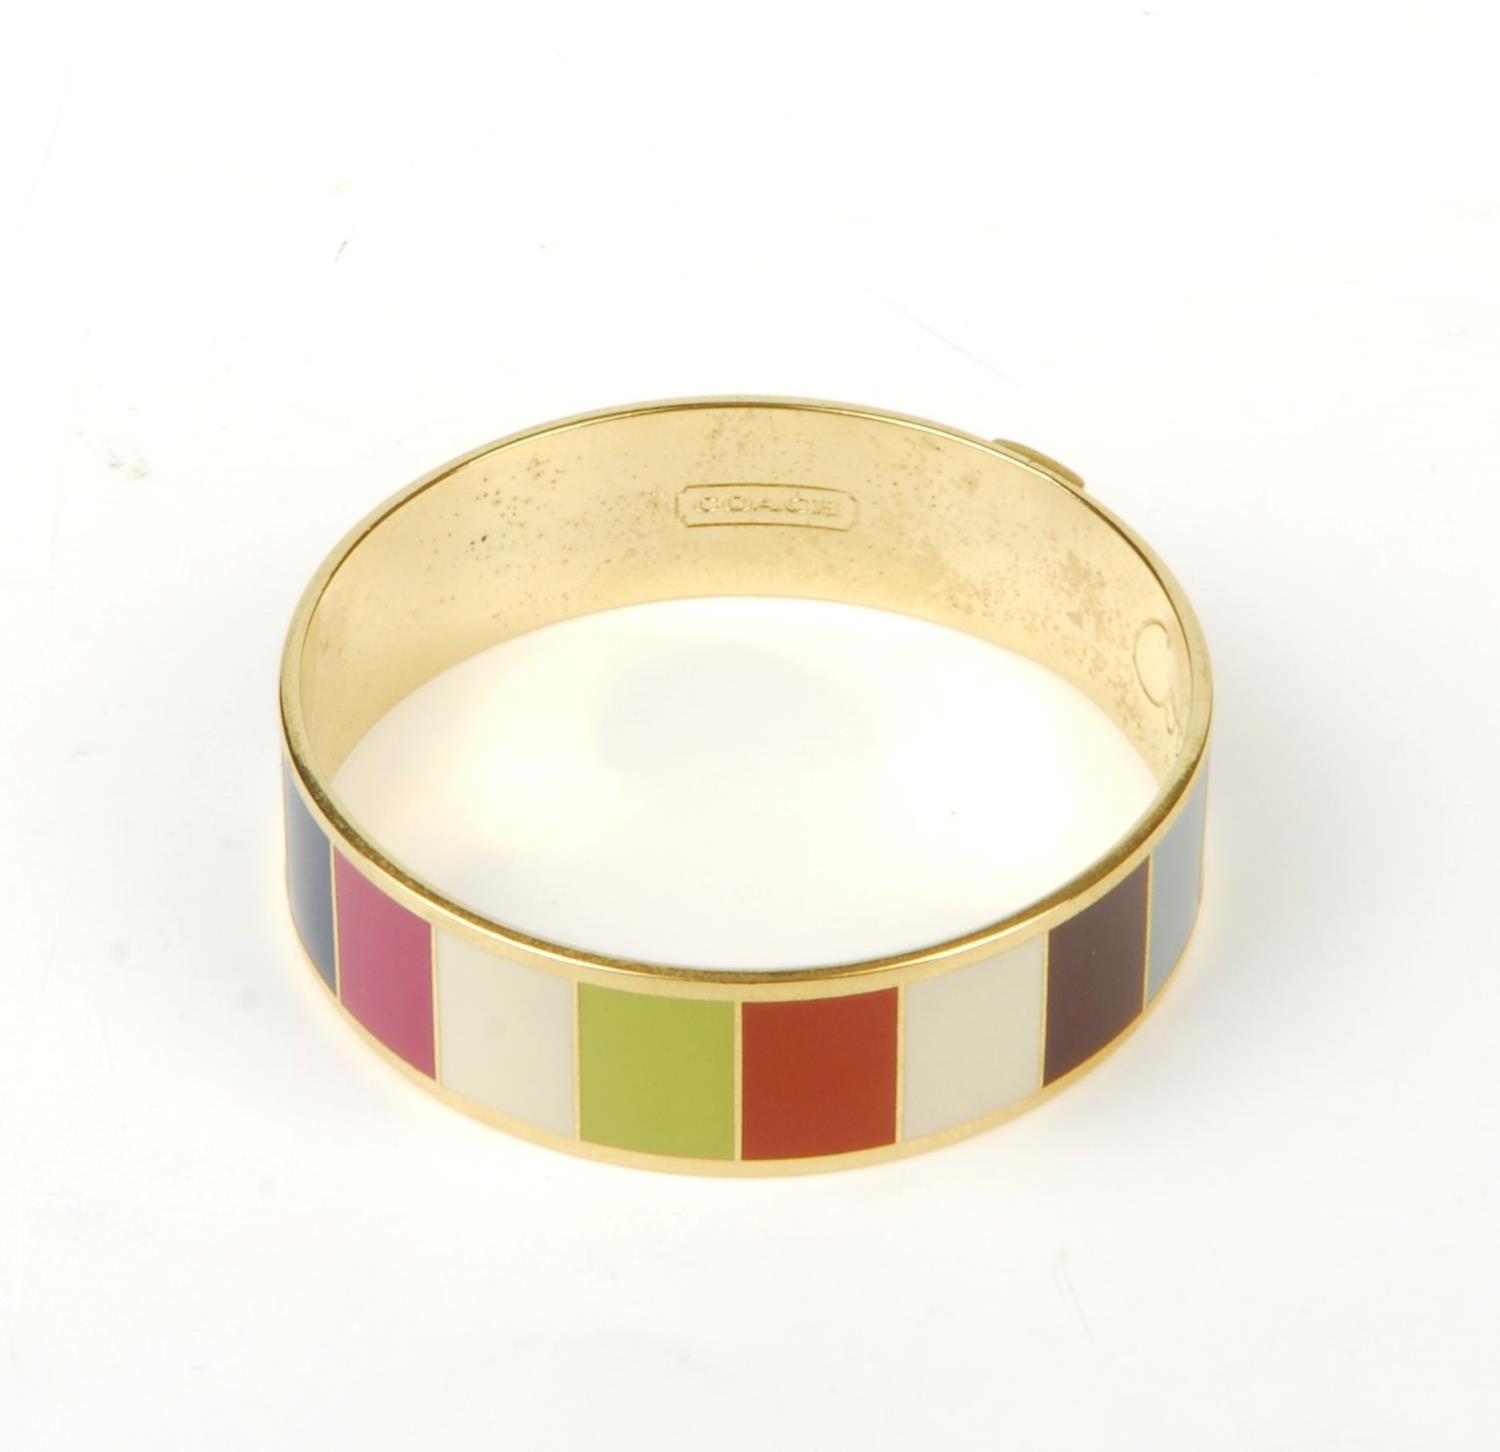 COACH - a Legacy striped bangle. The gold-tone bangle featuring multicoloured striped enamel inlay - Image 3 of 9